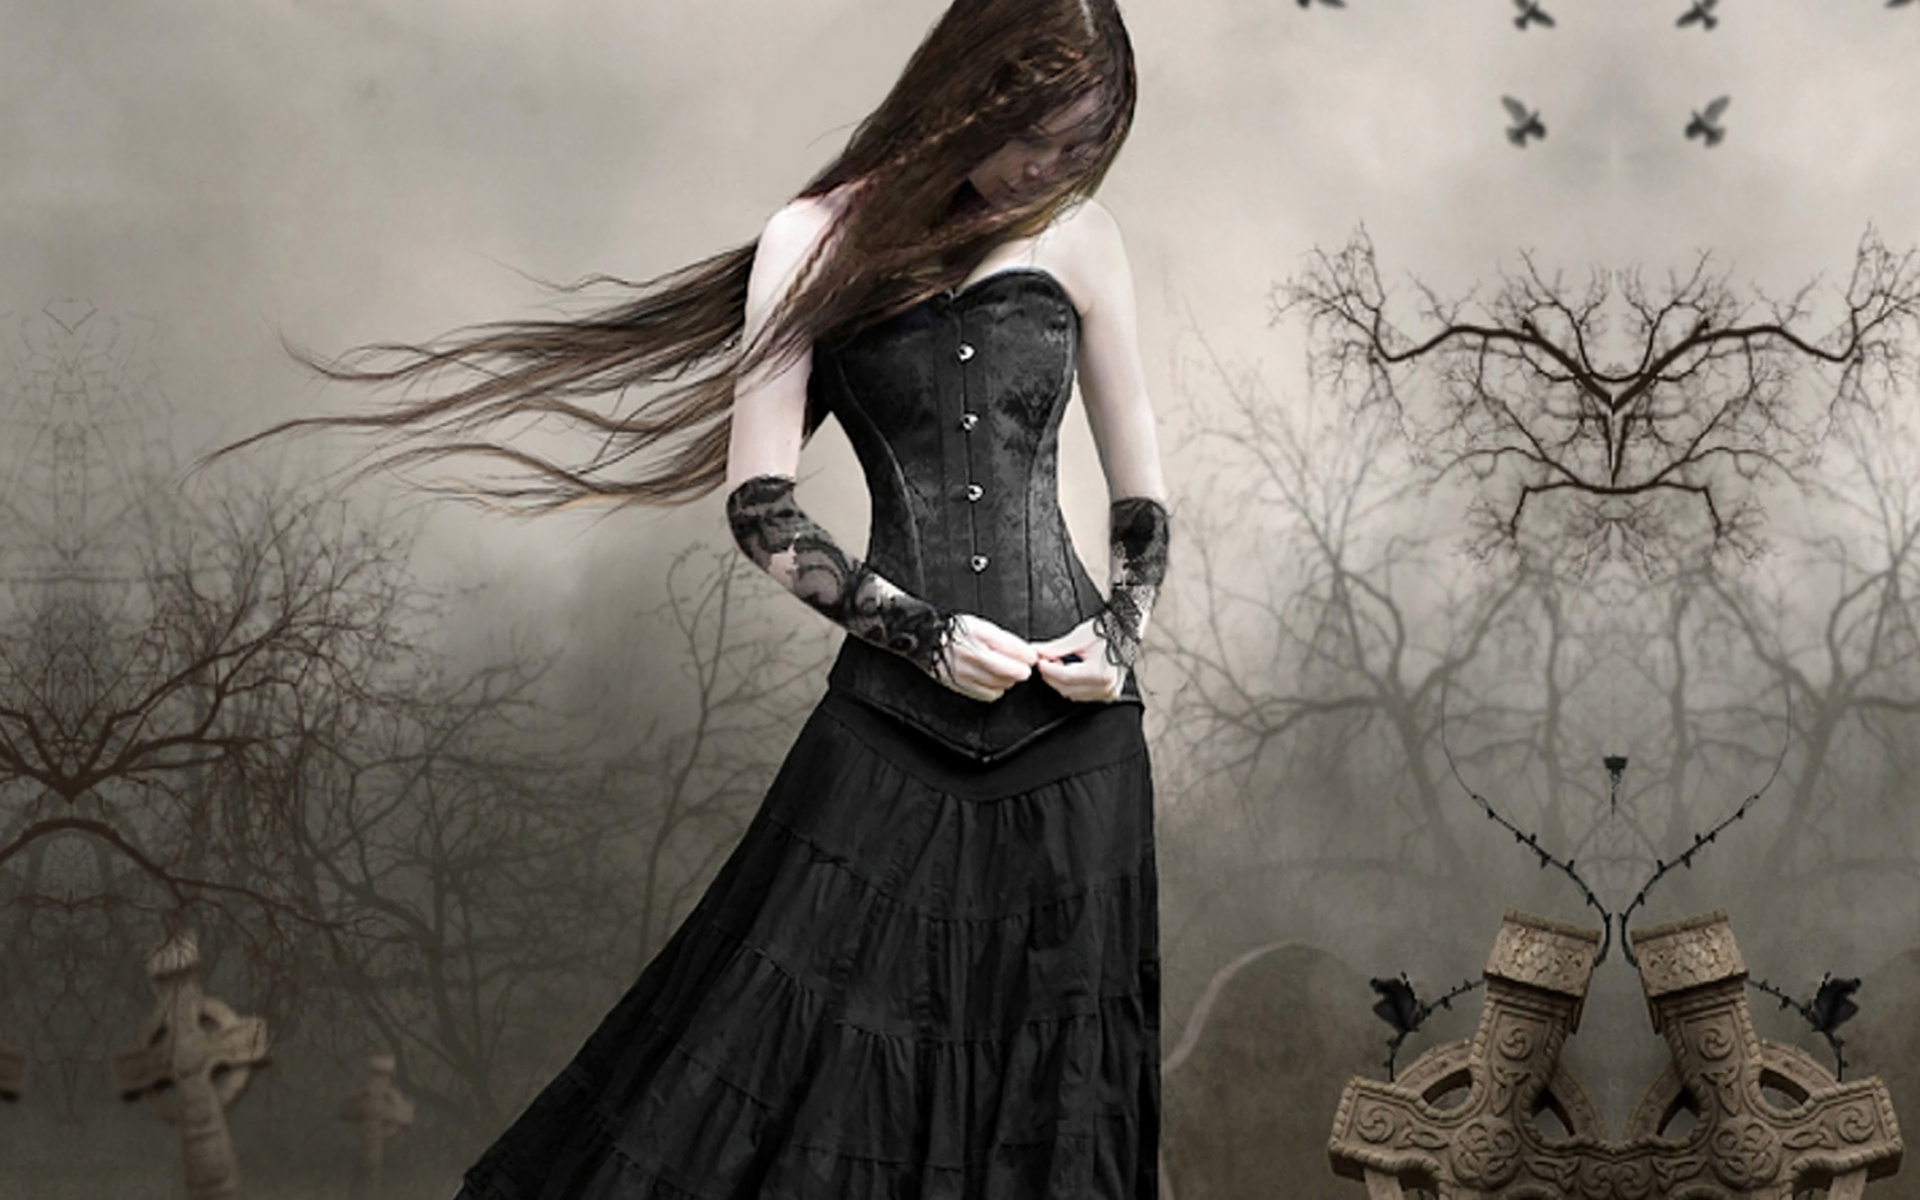 Goth: Dark ambient scene, Brooding and mysterious, Victorian-inspired goth style, Graveyard. 1920x1200 HD Wallpaper.